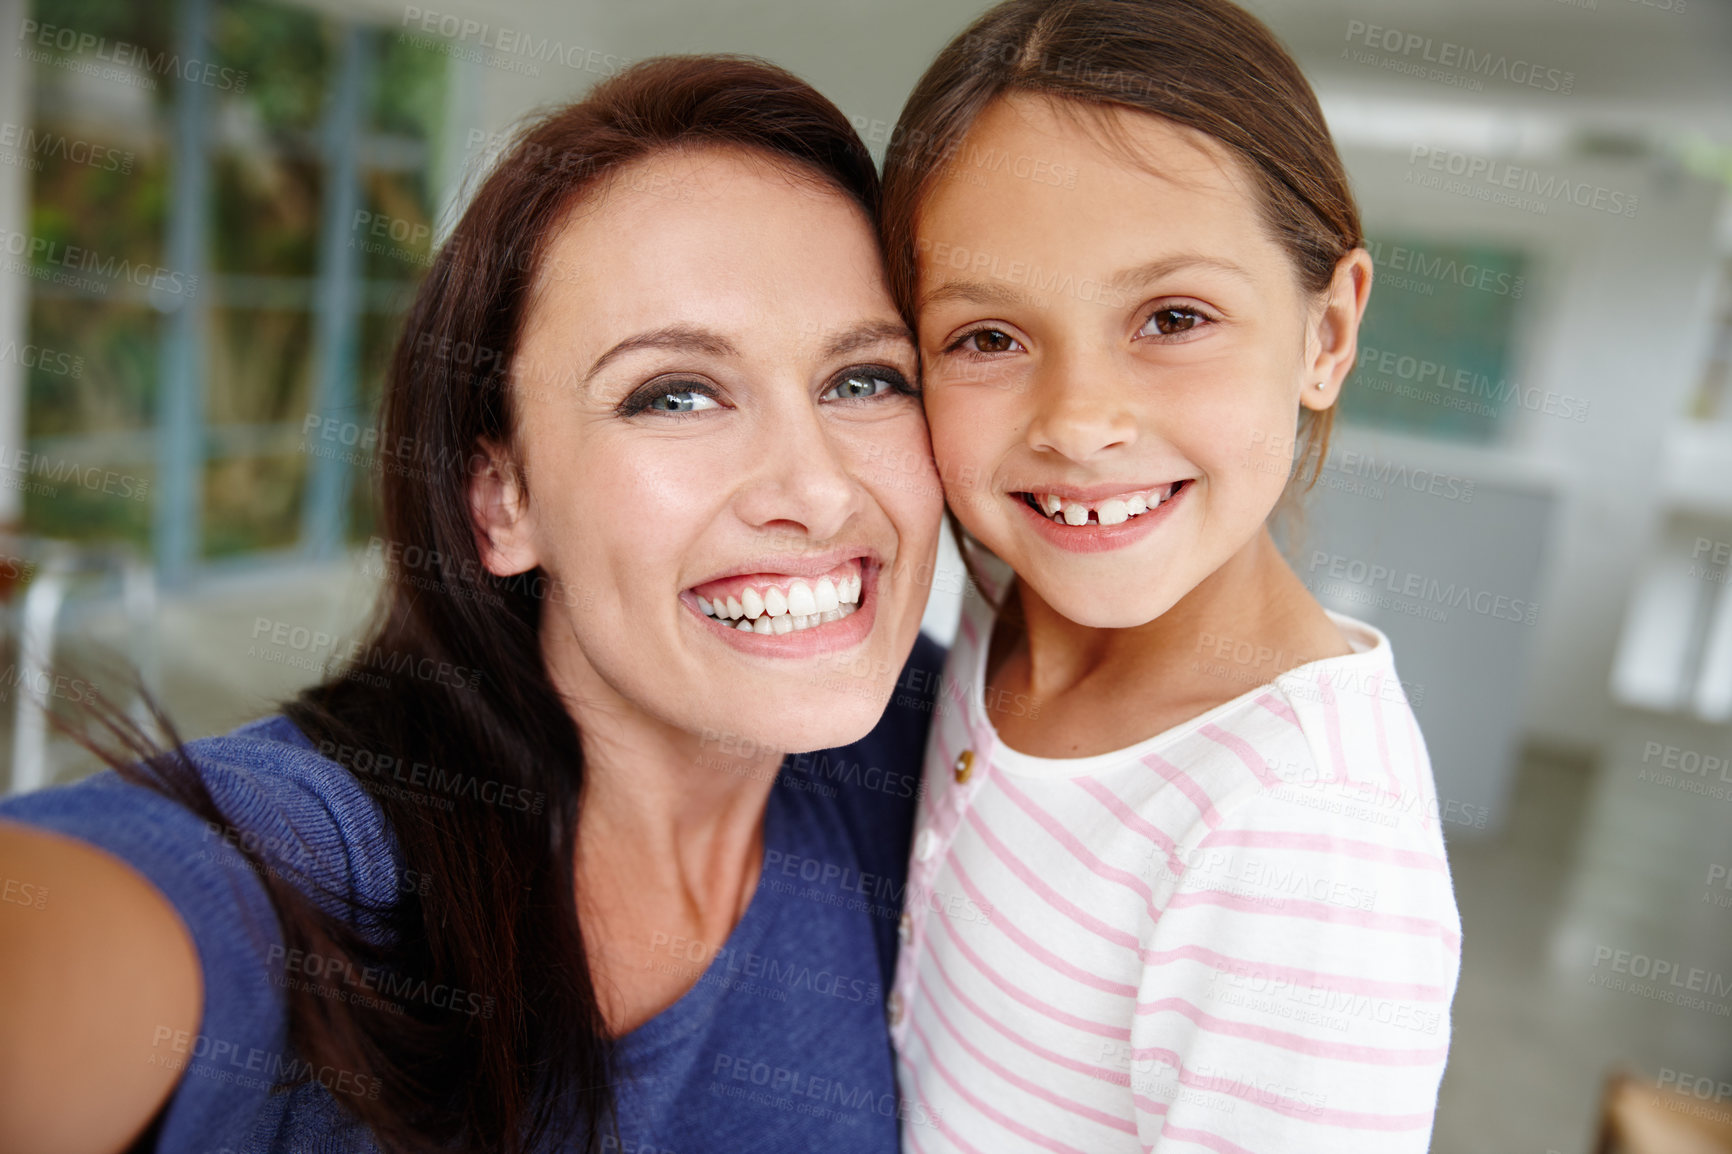 Buy stock photo Shot of a mother and daughter taking a selfie at home